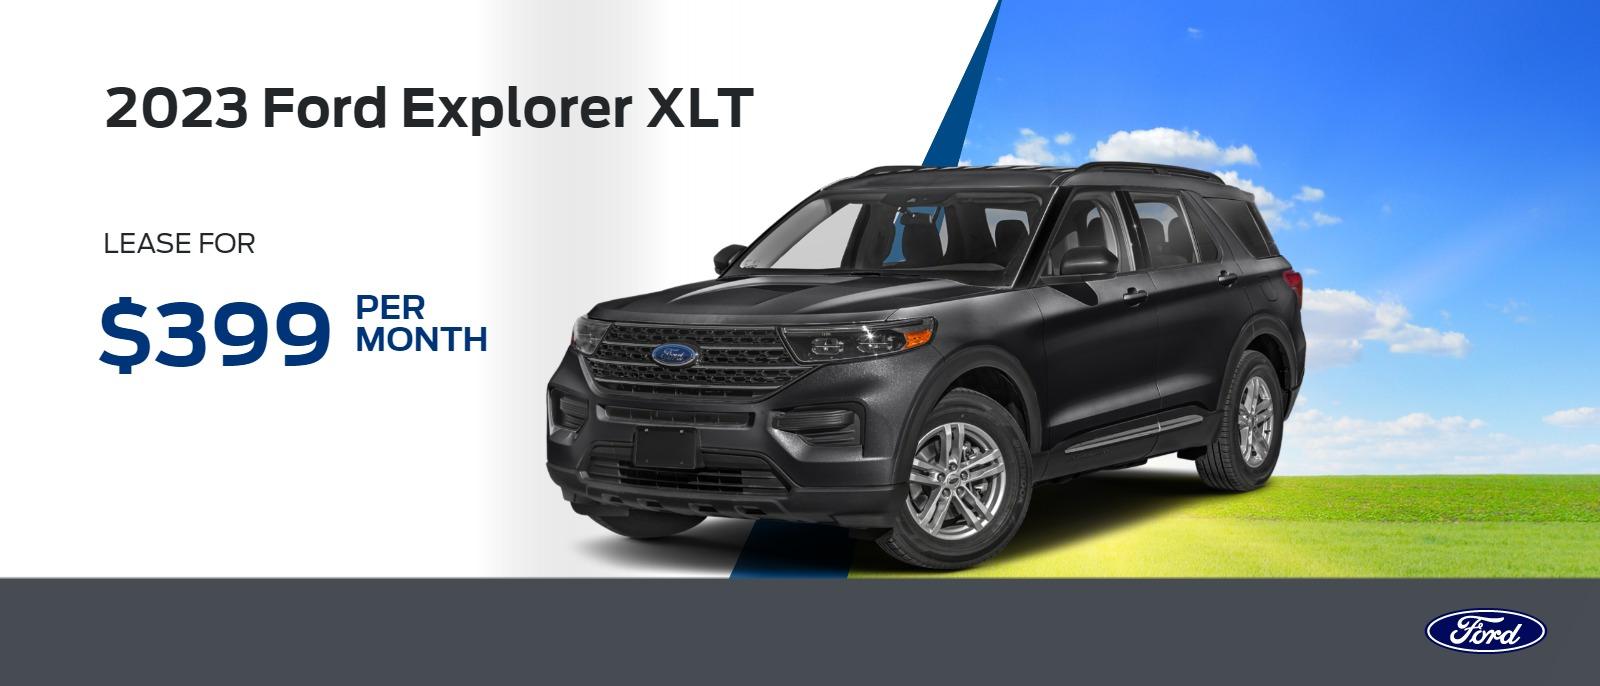 New 2023 Ford Explorer XLT $399/month lease